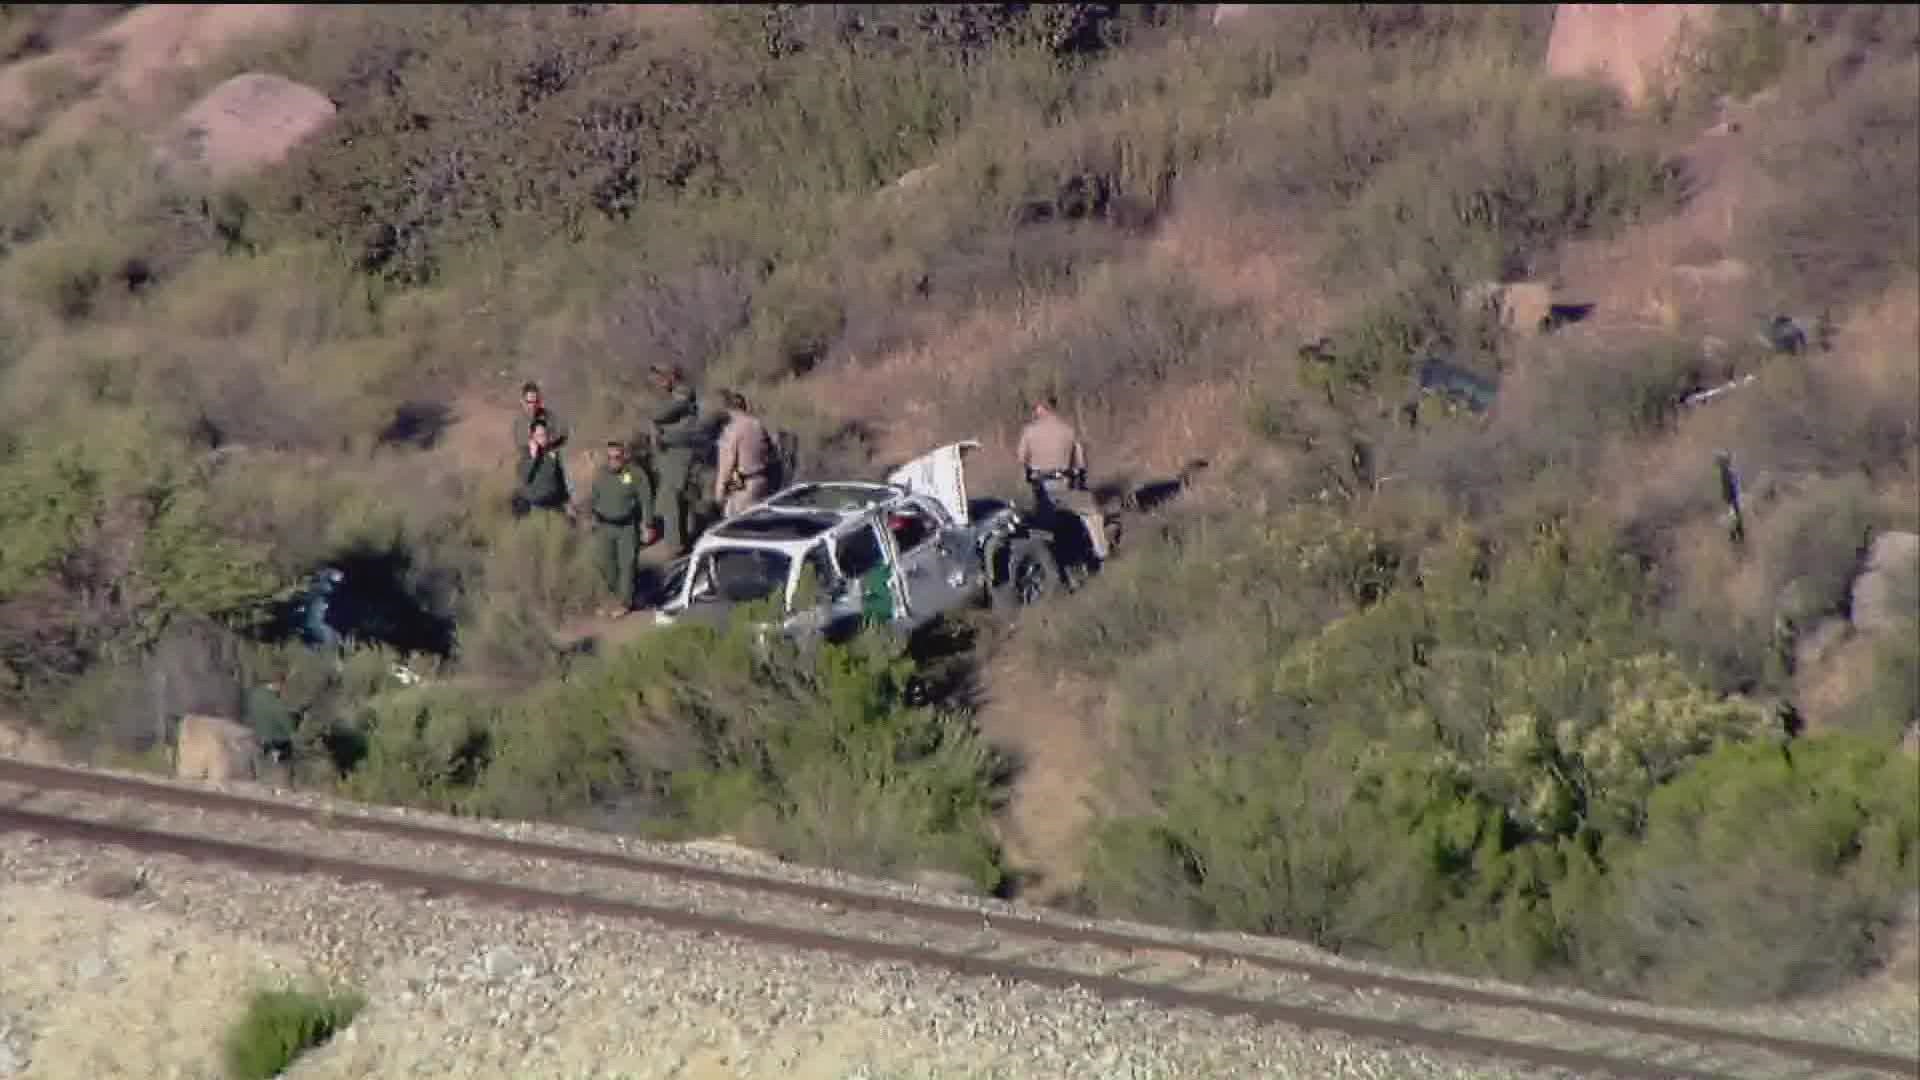 The agent was thrown from the vehicle before being found by another agent, according to a Border Patrol spokesperson.